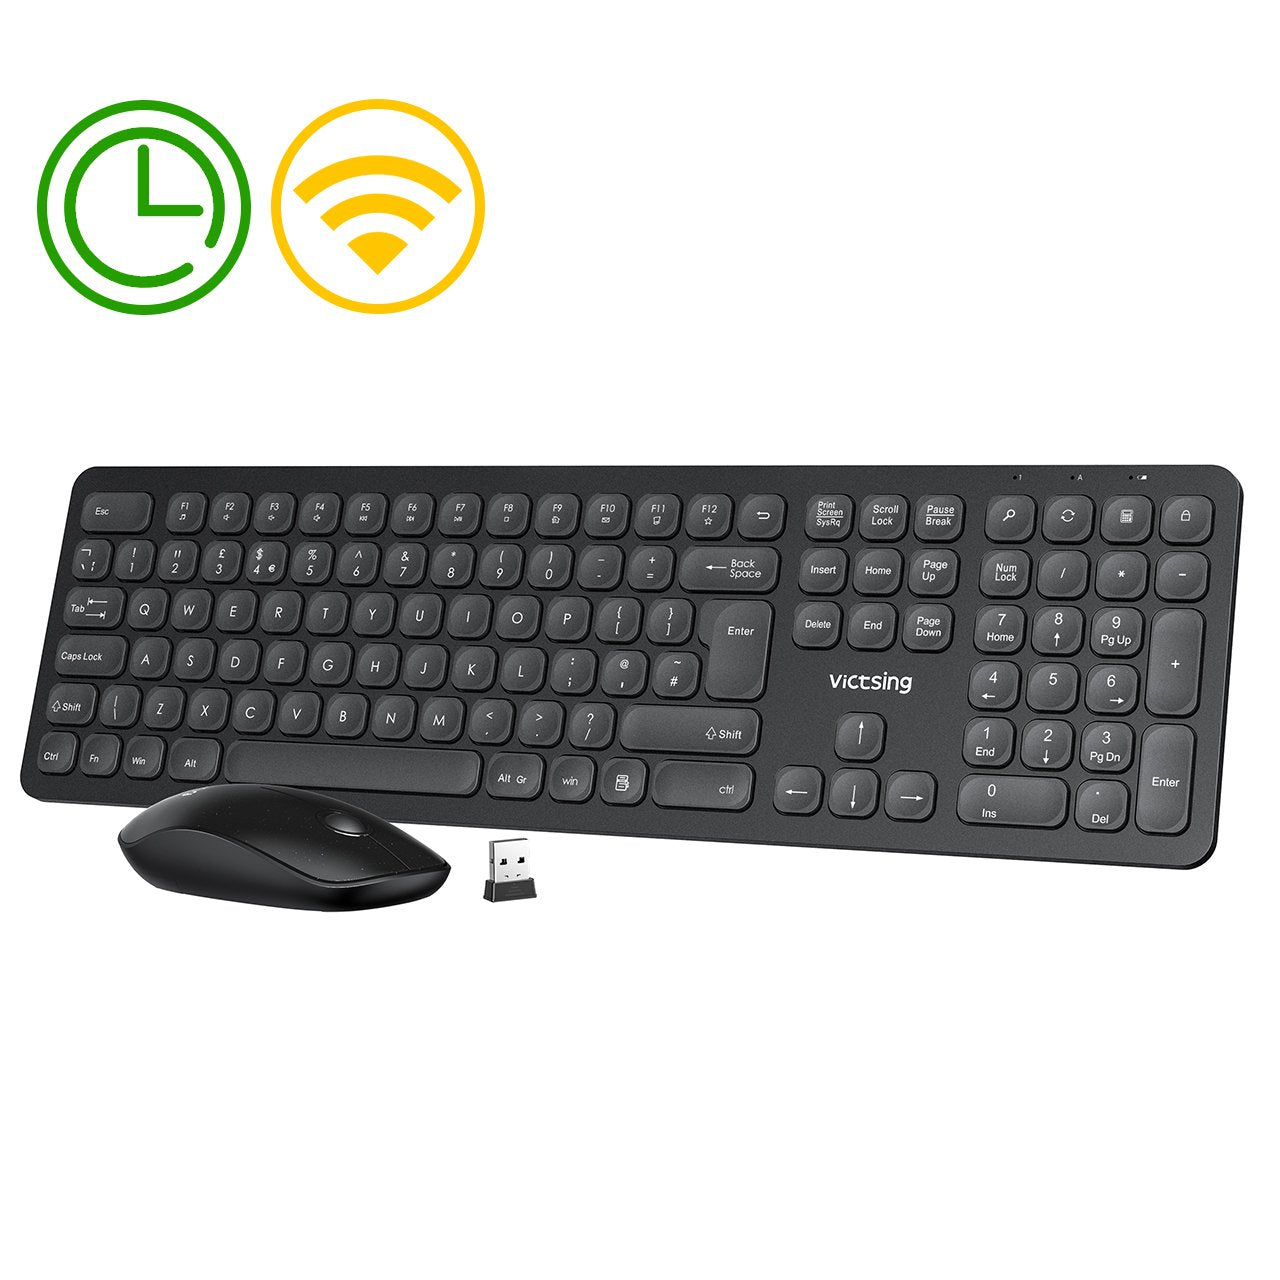 Keyboard and Mouse 252E for Laptop, PC, Computer